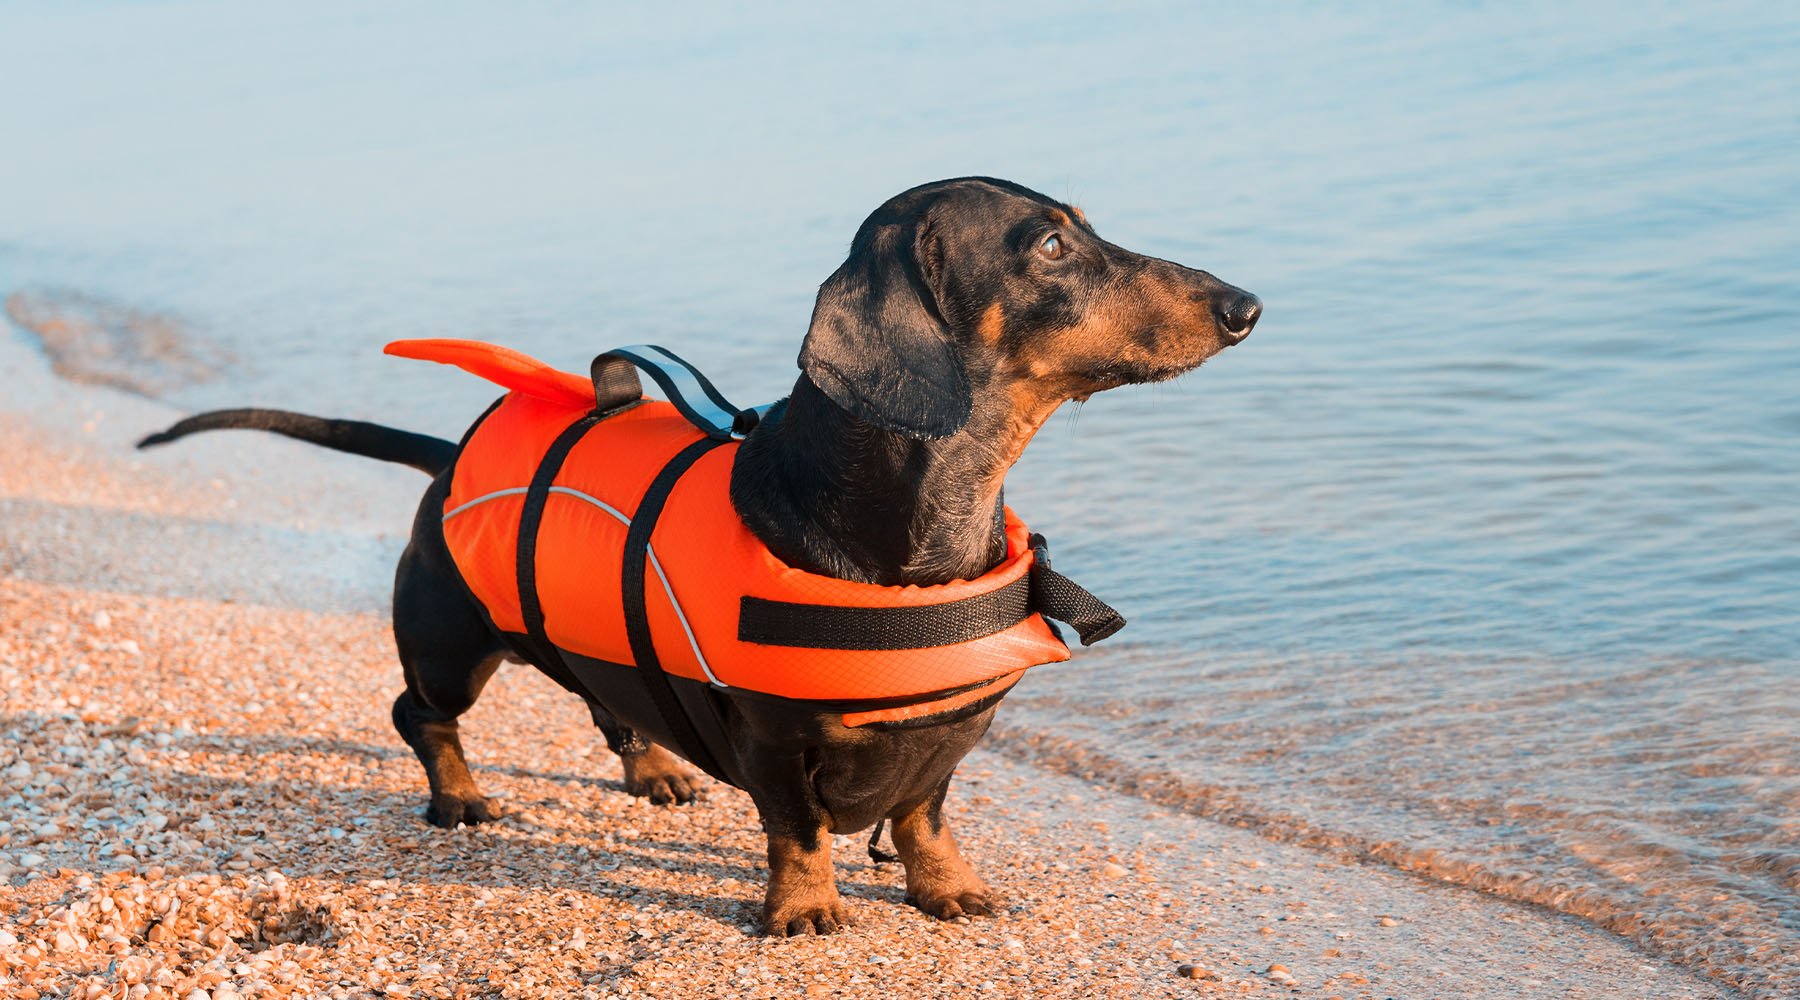 Dachshund breed in life jacket standing on the beach